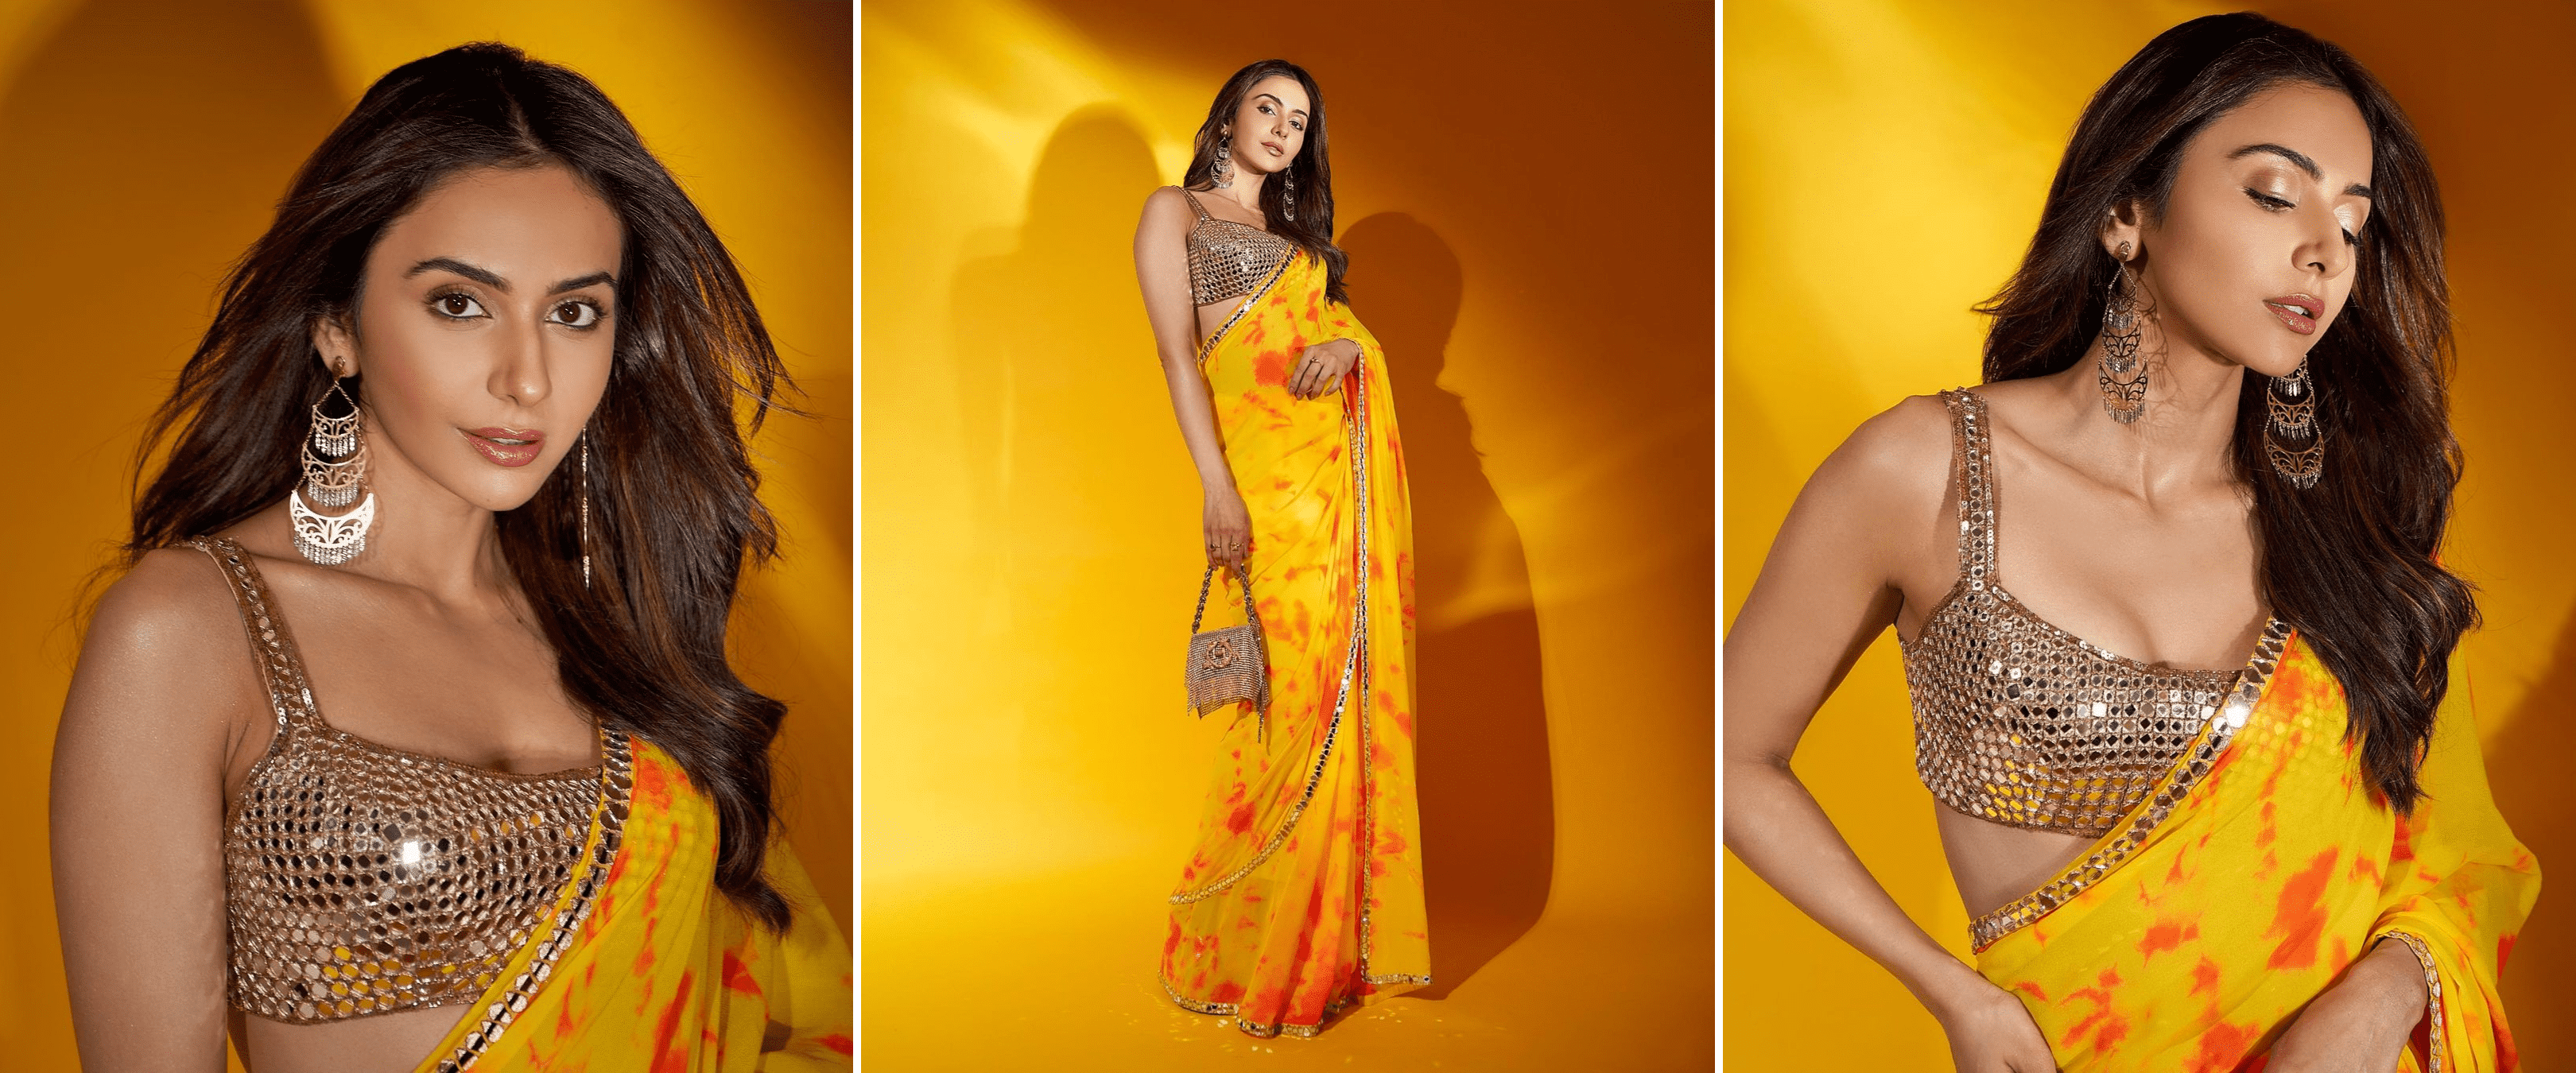 Rakul Preet Singh's Mirror Work Blouse paired with a Yellow and Orange Printed Saree